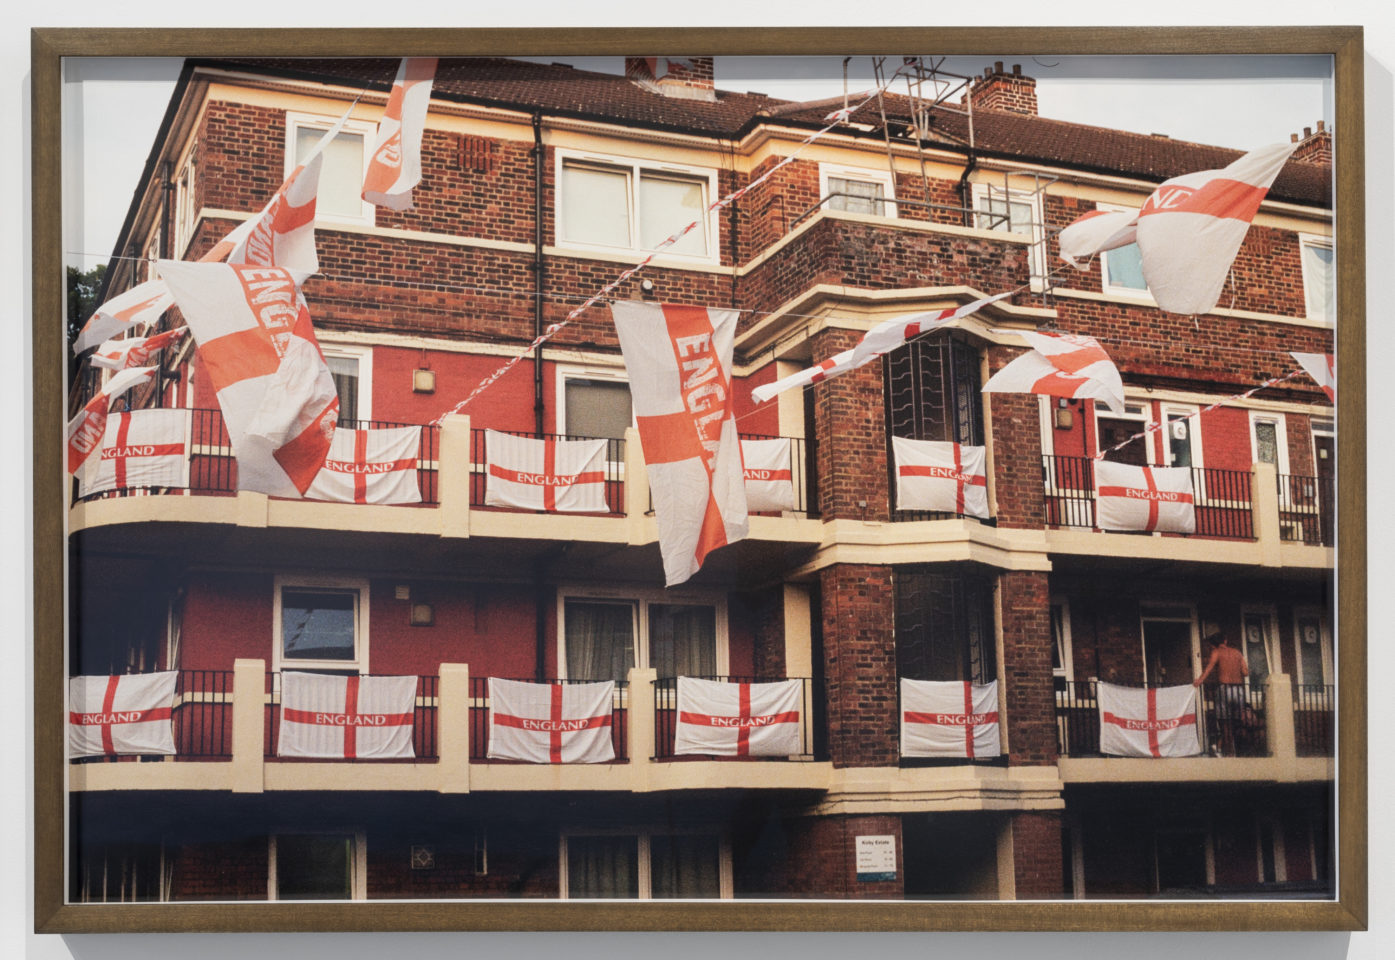 A photo of a council estate in South London with England's St George's flags hung around the building.